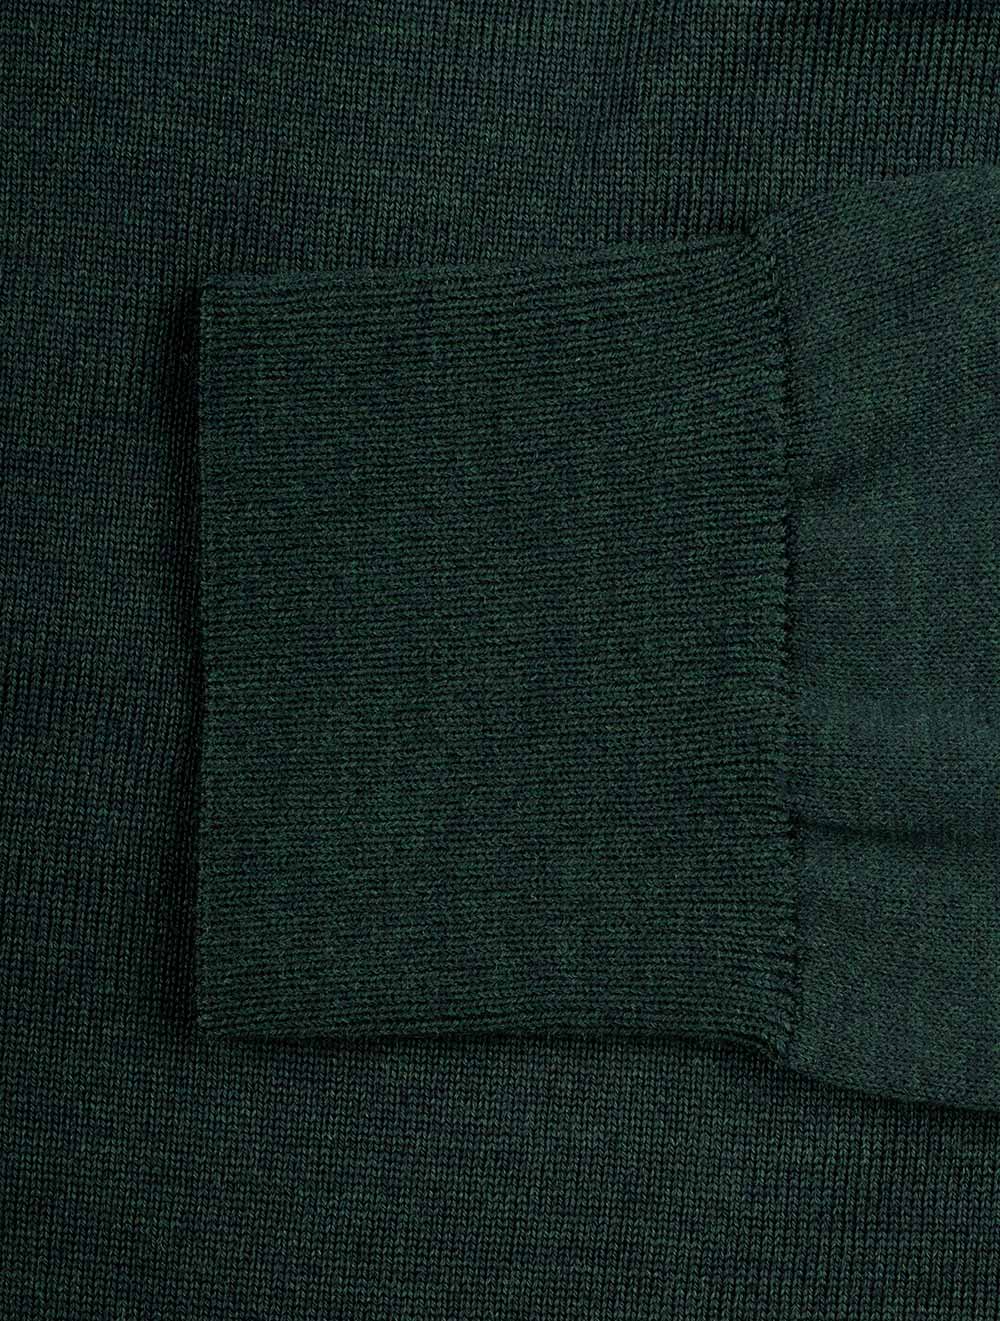 Zipped Pullover With Suede Green